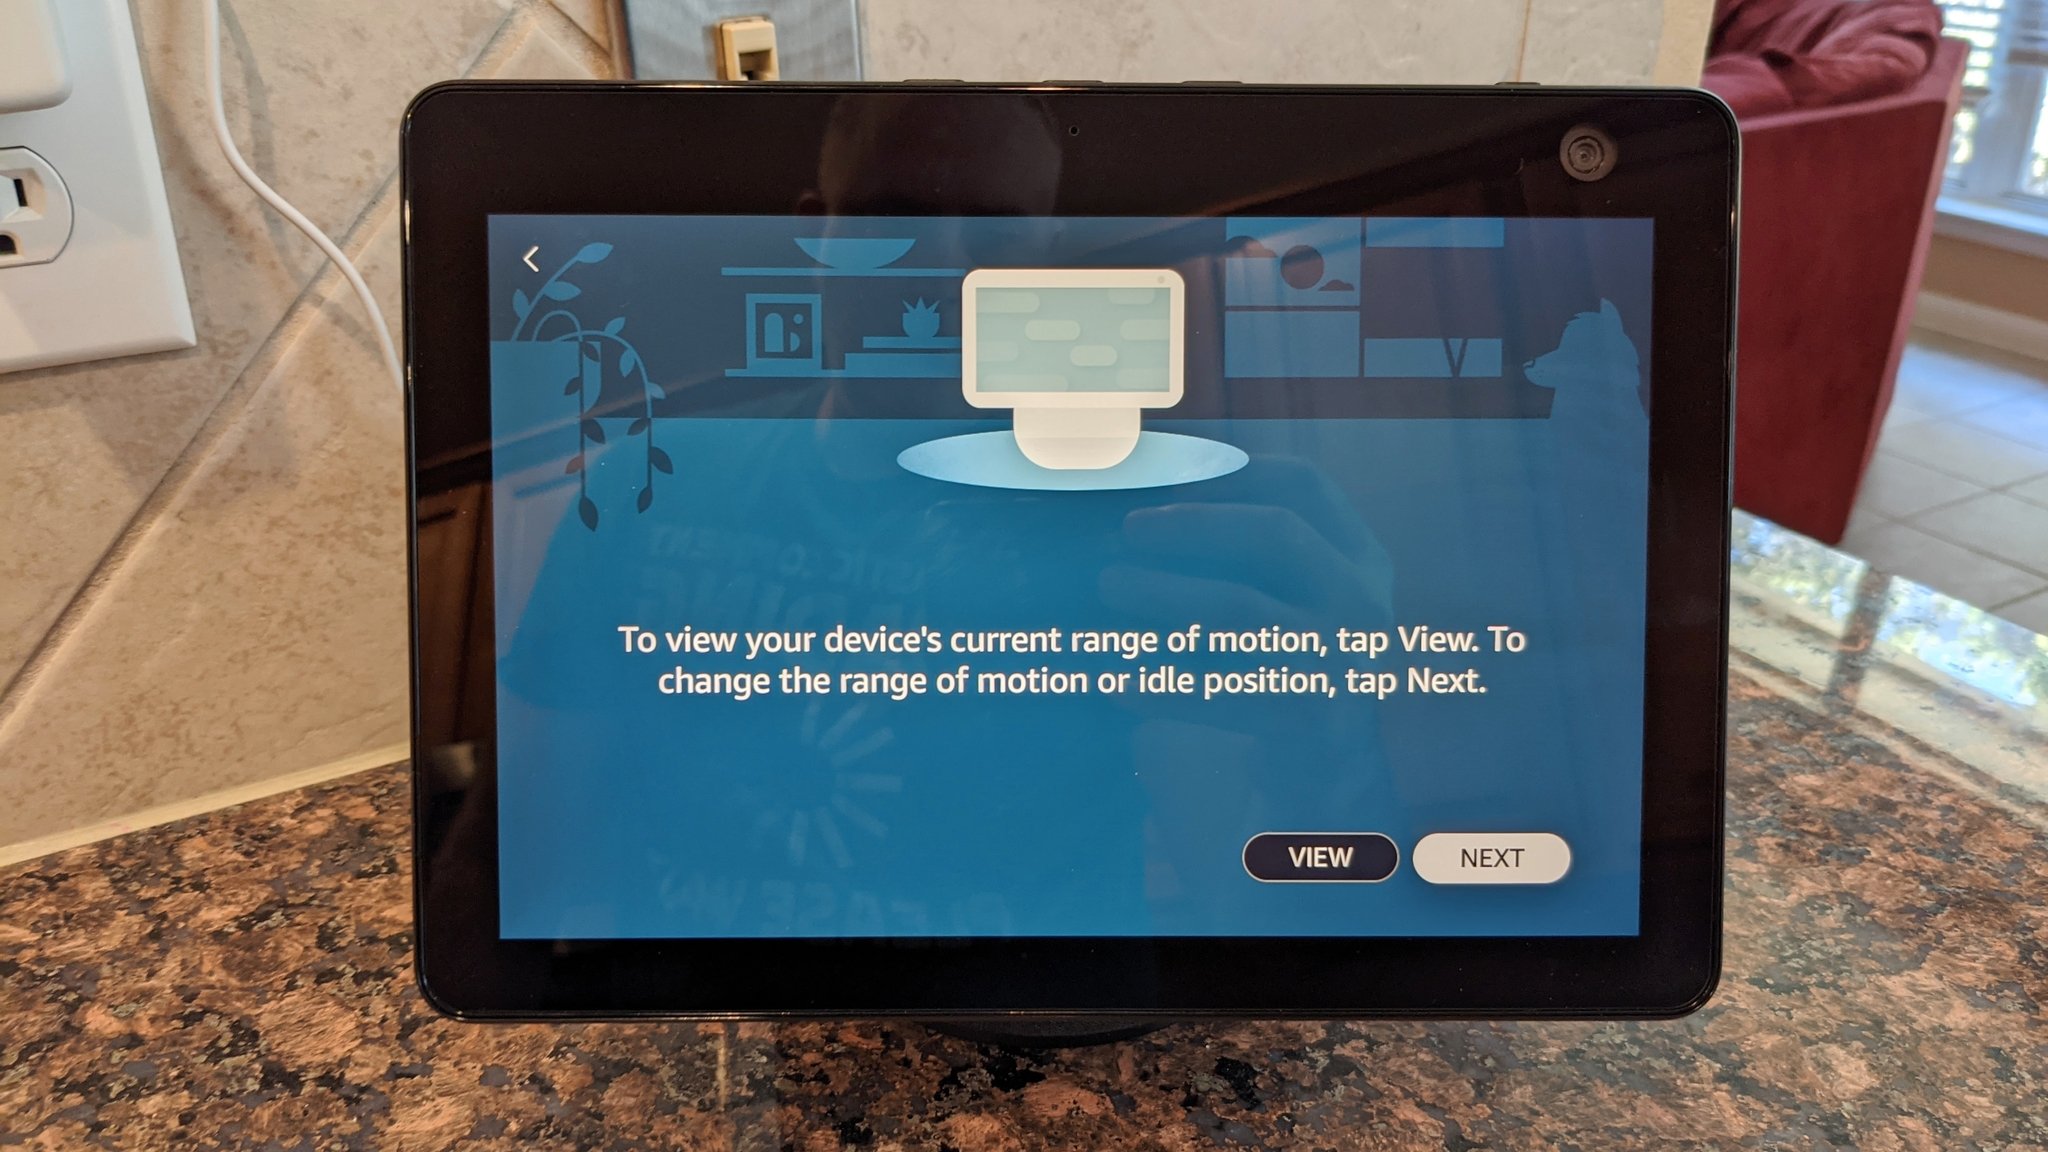 Echo Show 10 motion screen: "To view your device's current range of motion, tap View. To change the range of motion or idle position, tap Next."